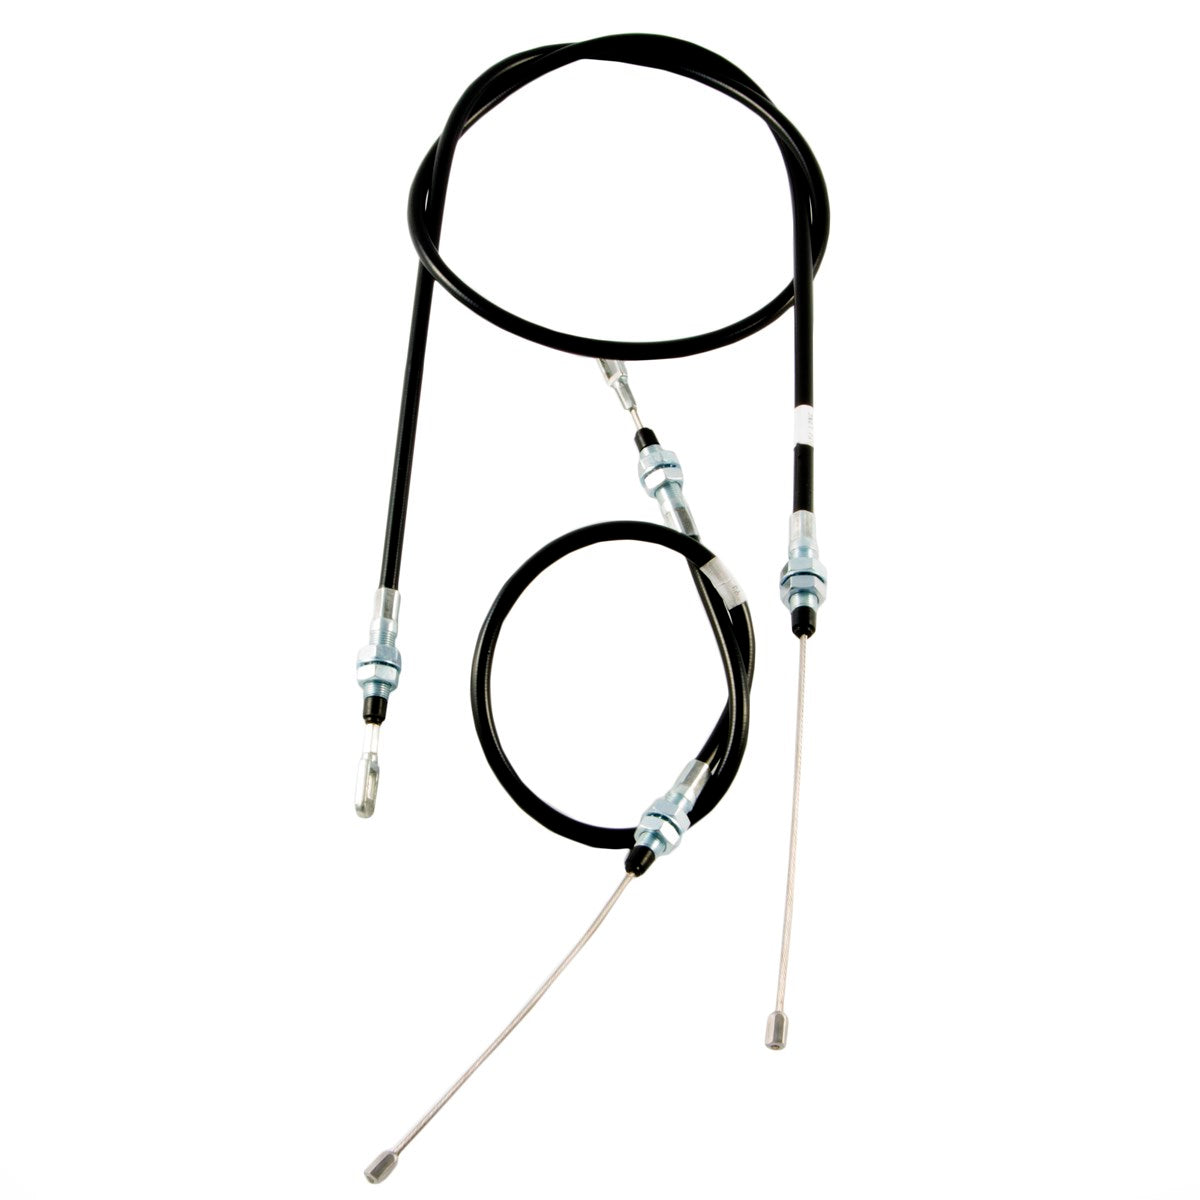 Emergency Brake Cable for Jeep Wrangler YJ (1987-95) – .E.